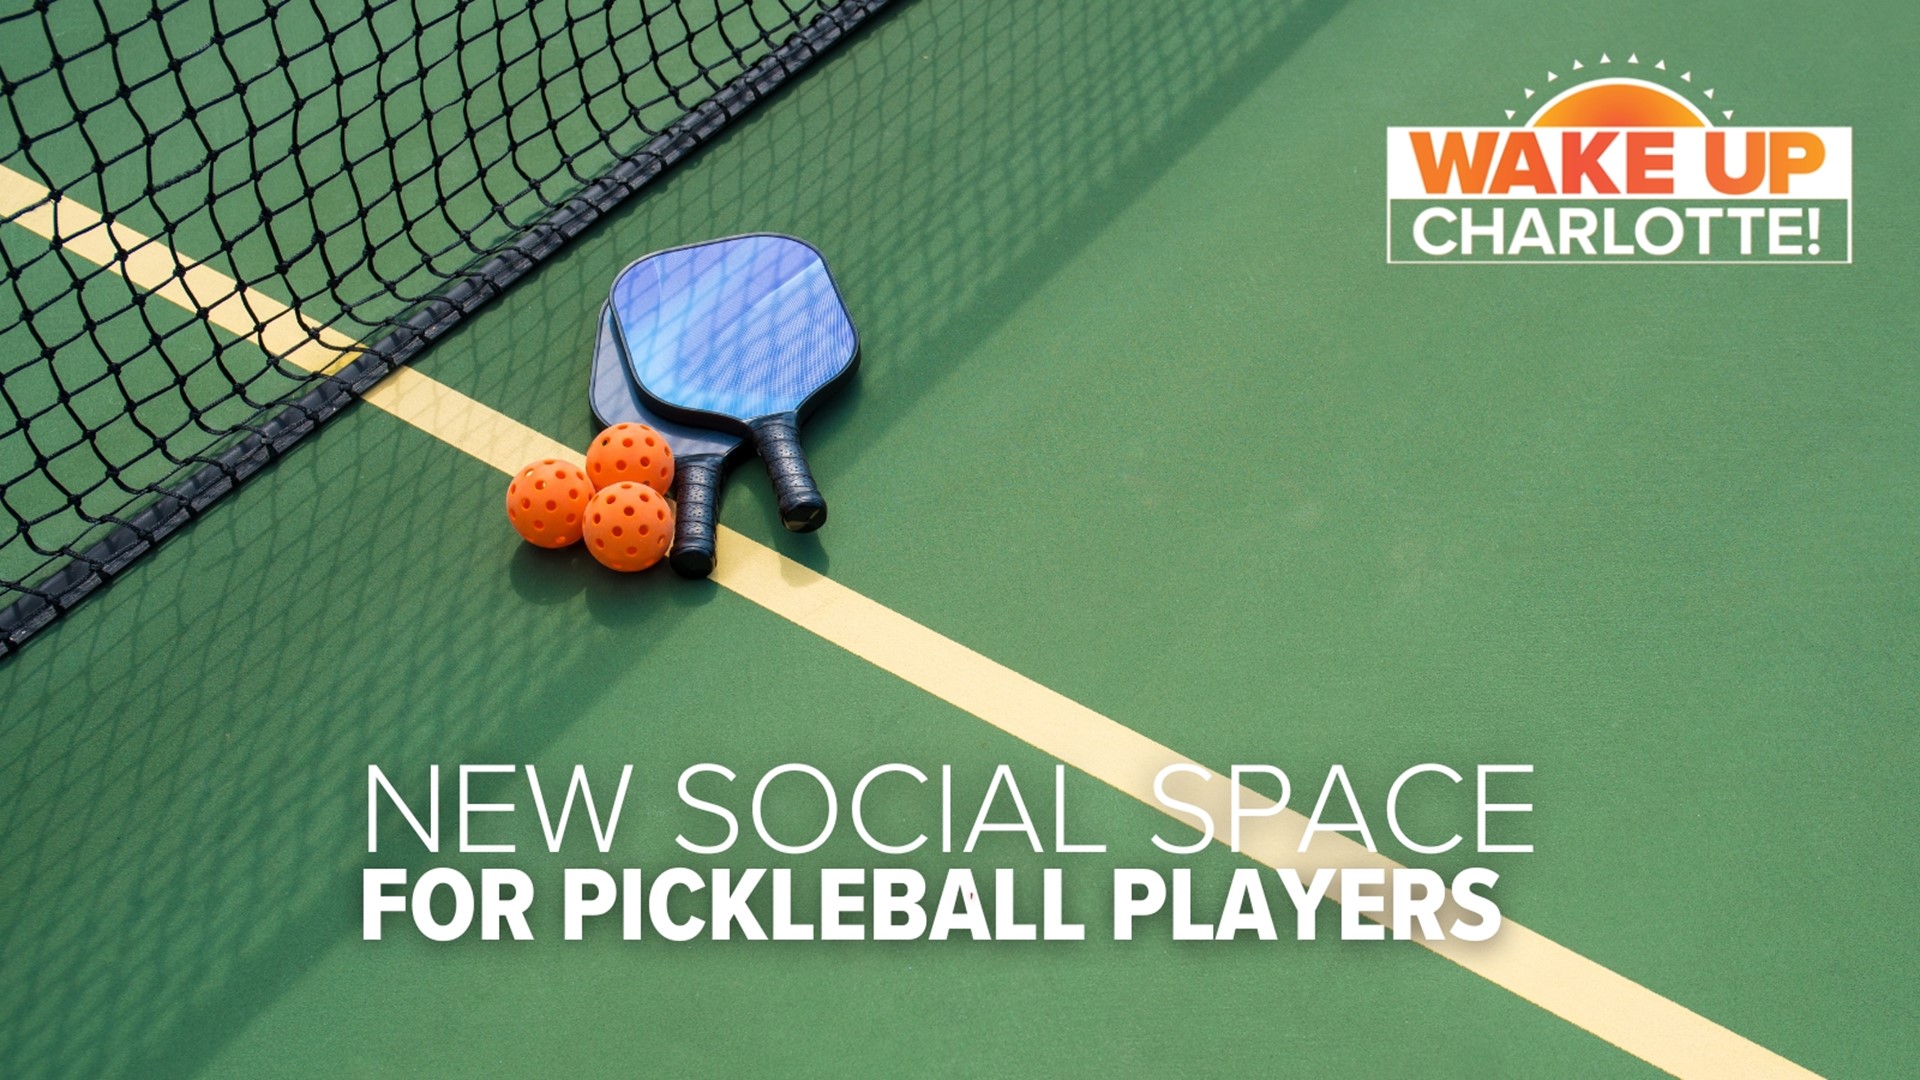 New social space for pickleball players in Charlotte wcnc